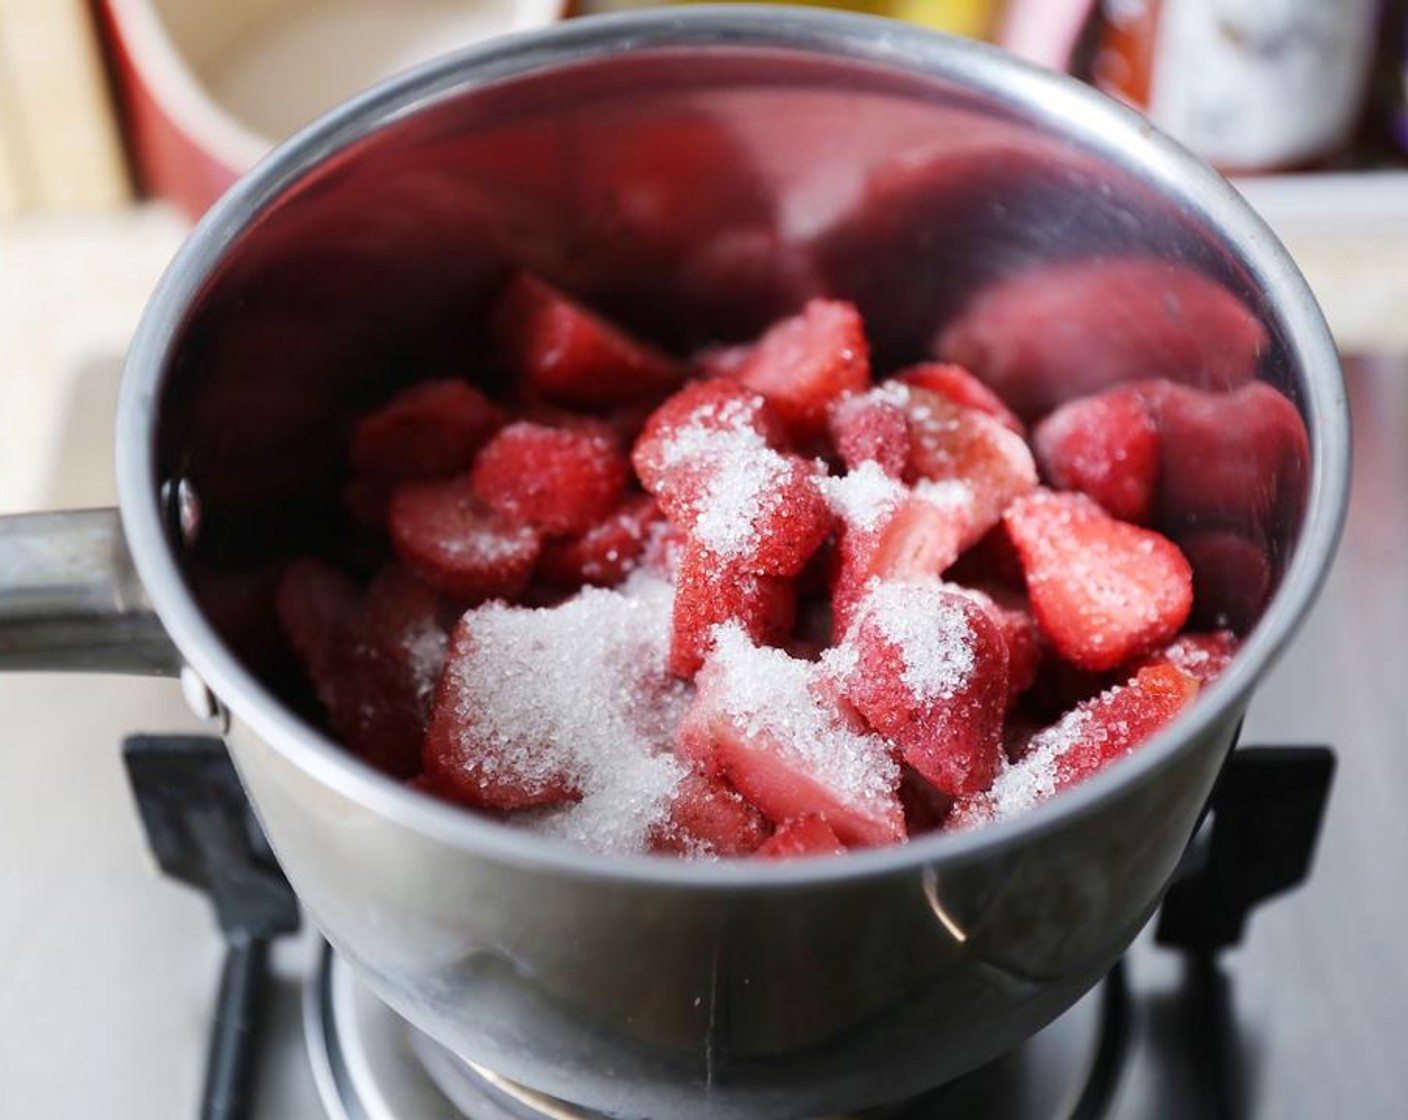 step 1 Combine the Fresh Strawberries (5 cups), Granulated Sugar (1/2 cup), juice from Lemon (1), Salt (1 pinch) in a medium pot.